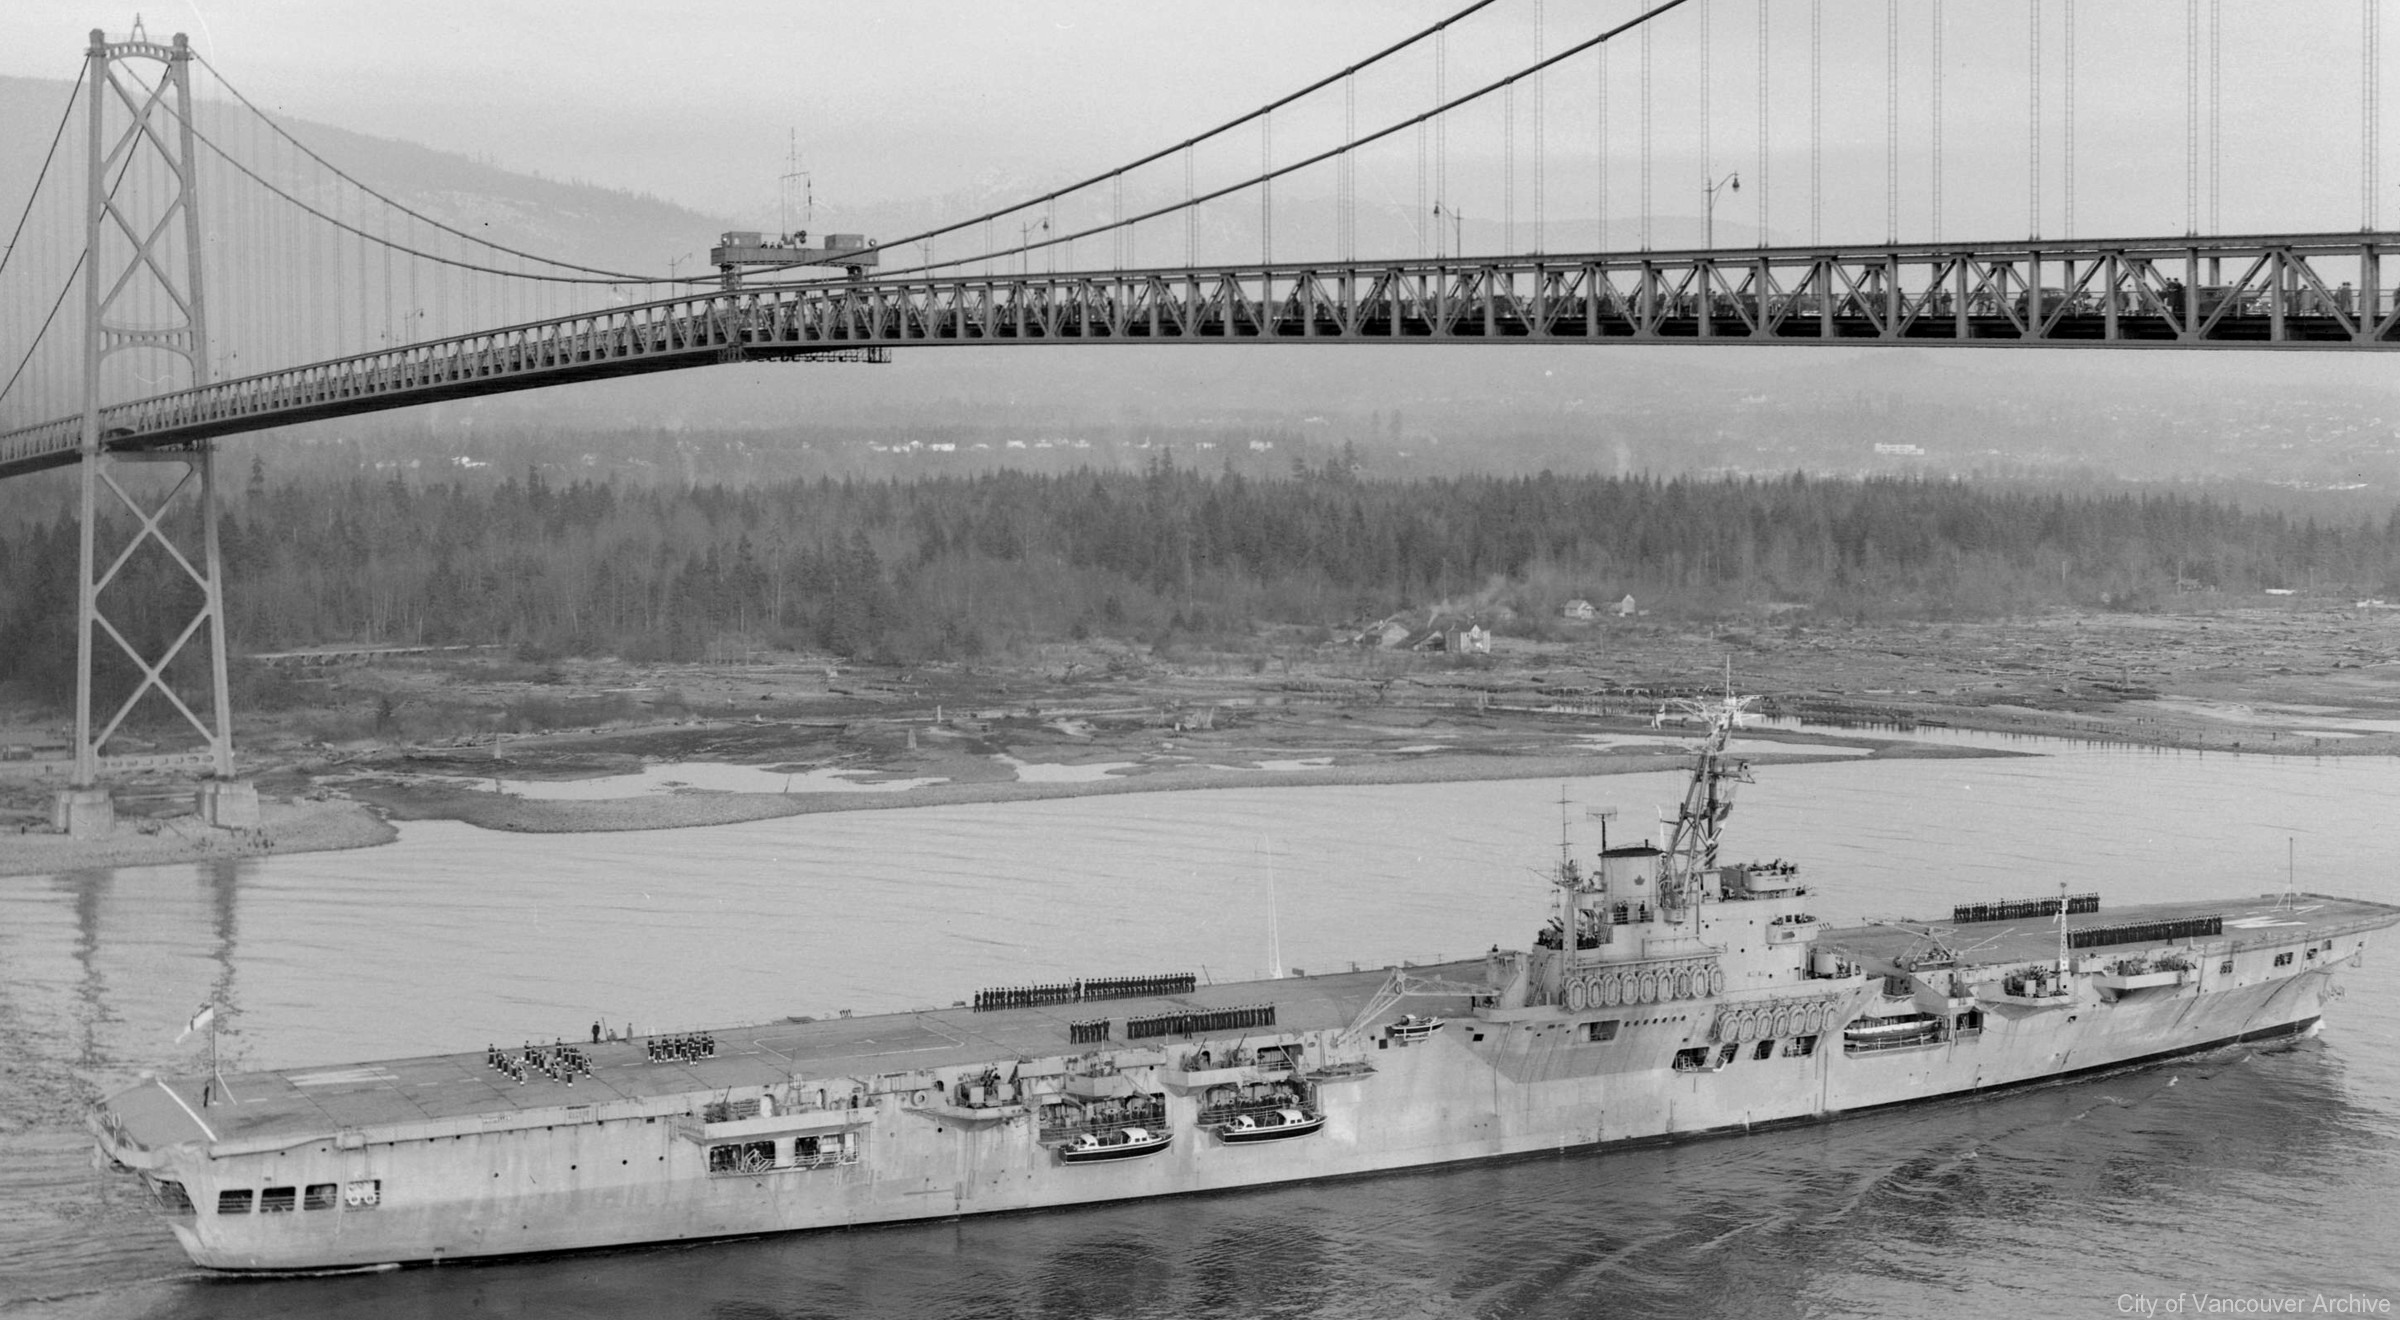 r-31 hmcs warrior colossus class aircraft carrier royal canadian navy 02